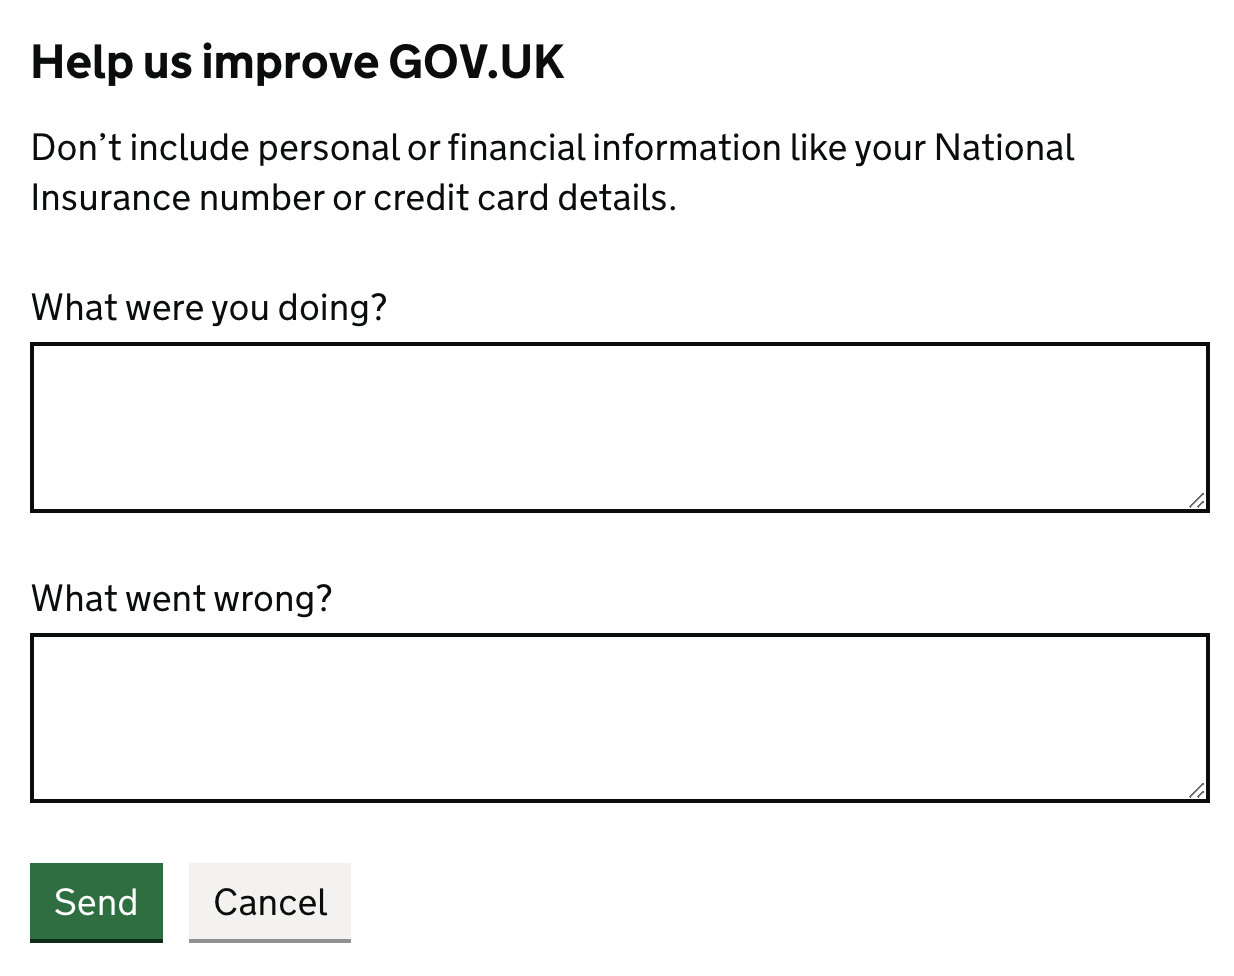 Form titled 'Help us improve GOV.UK', with two questions: 'What were you doing?' and 'What went wrong?'